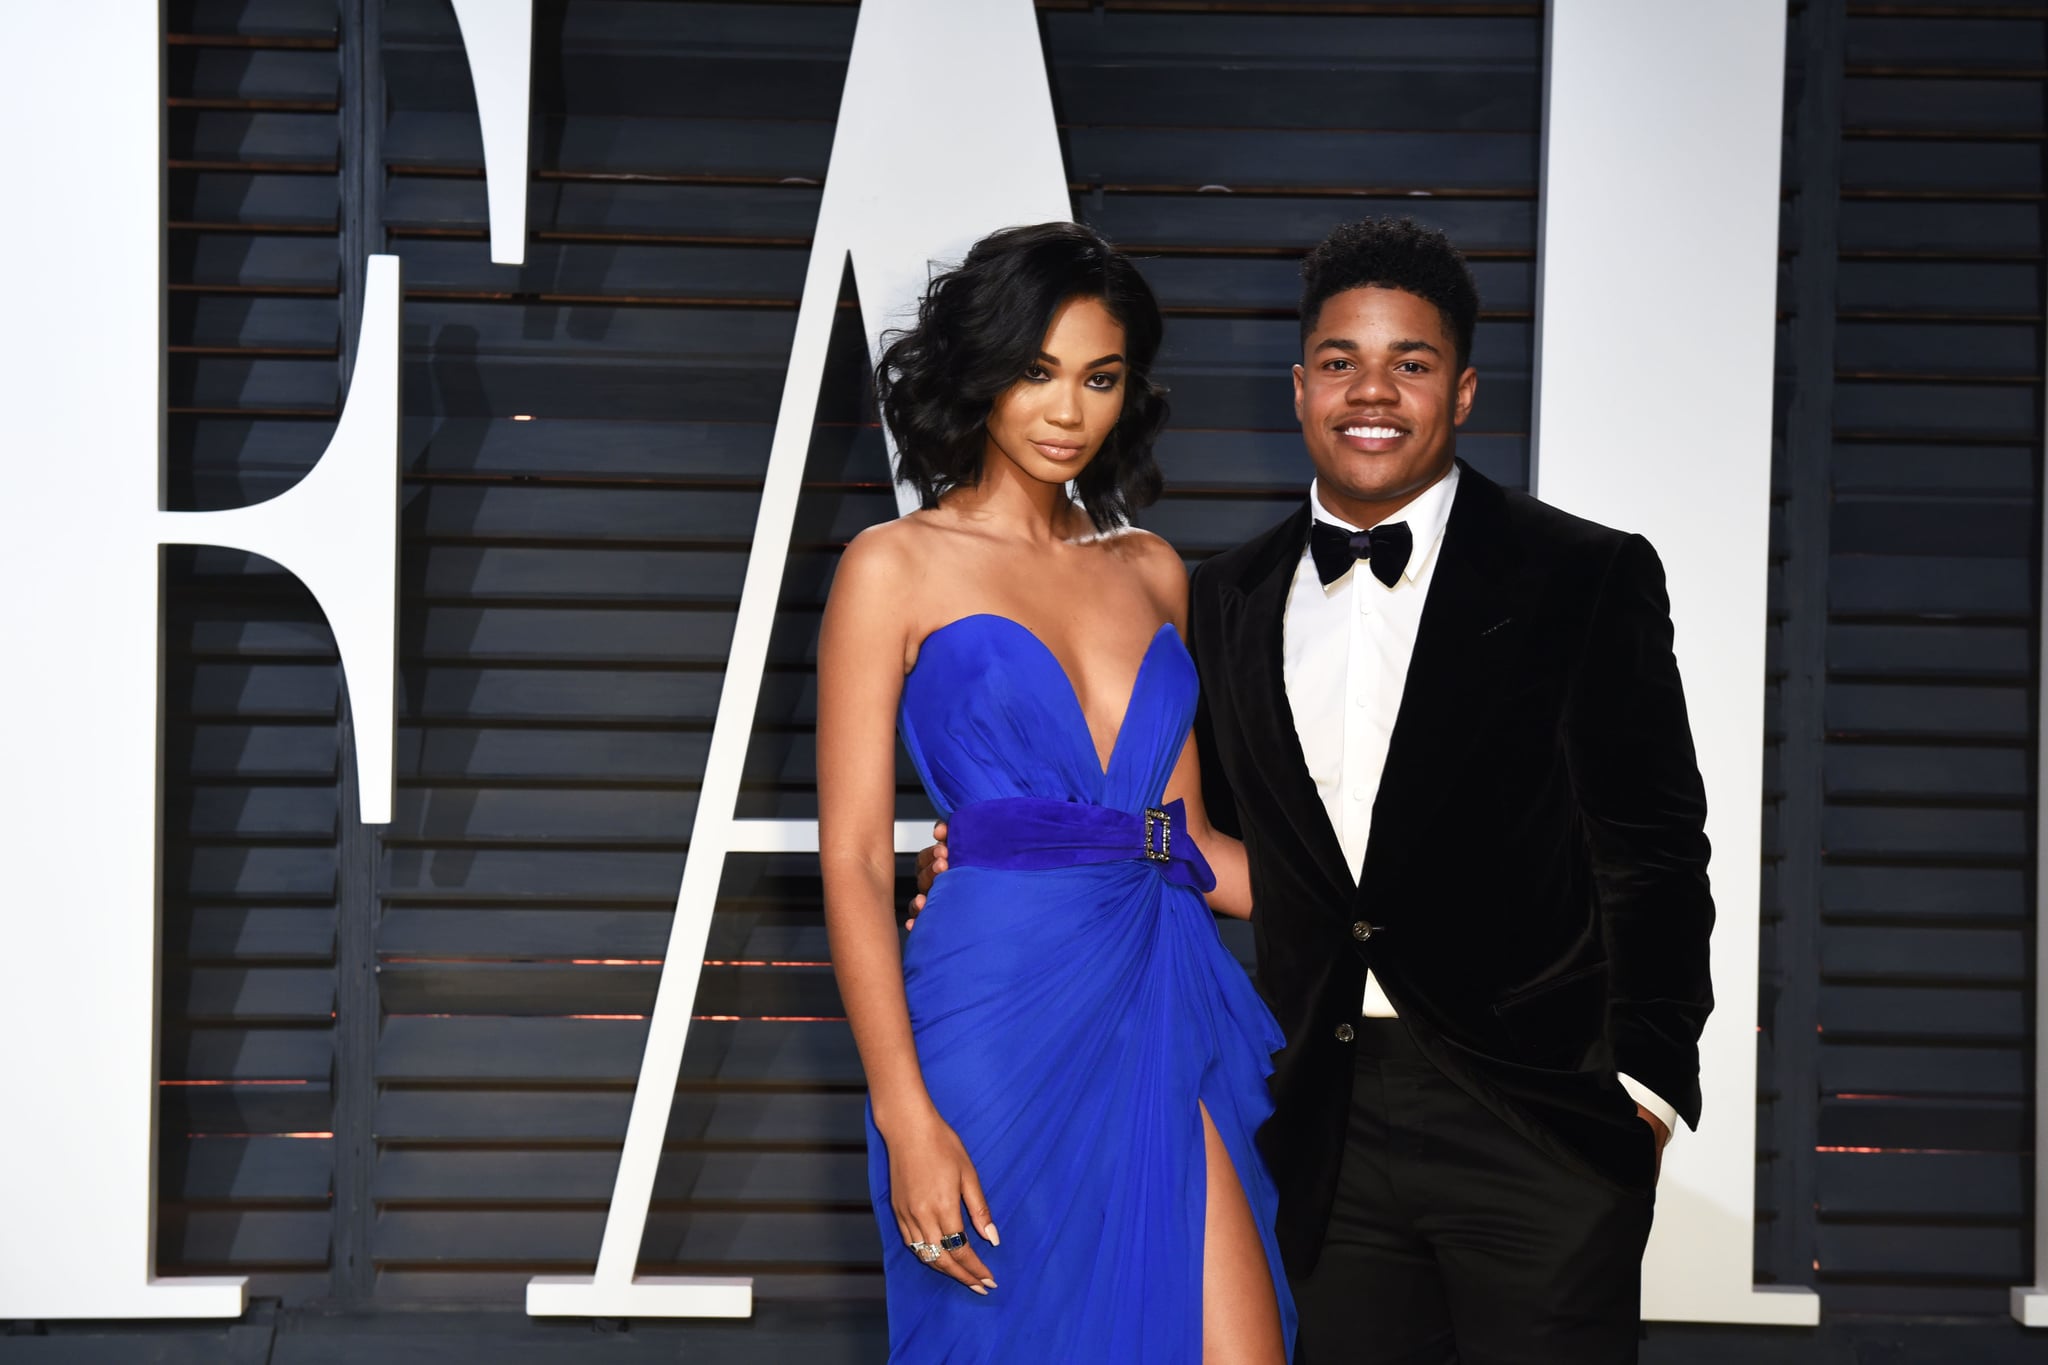 BEVERLY HILLS, CA - FEBRUARY 26:  Chanel Iman and NFL player Sterling Shepard attend the 2017 Vanity Fair Oscar Party hosted by Graydon Carter at Wallis Annenberg Centre for the Performing Arts on February 26, 2017 in Beverly Hills, California.  (Photo by Presley Ann Slack/Patrick McMullan via Getty Images)